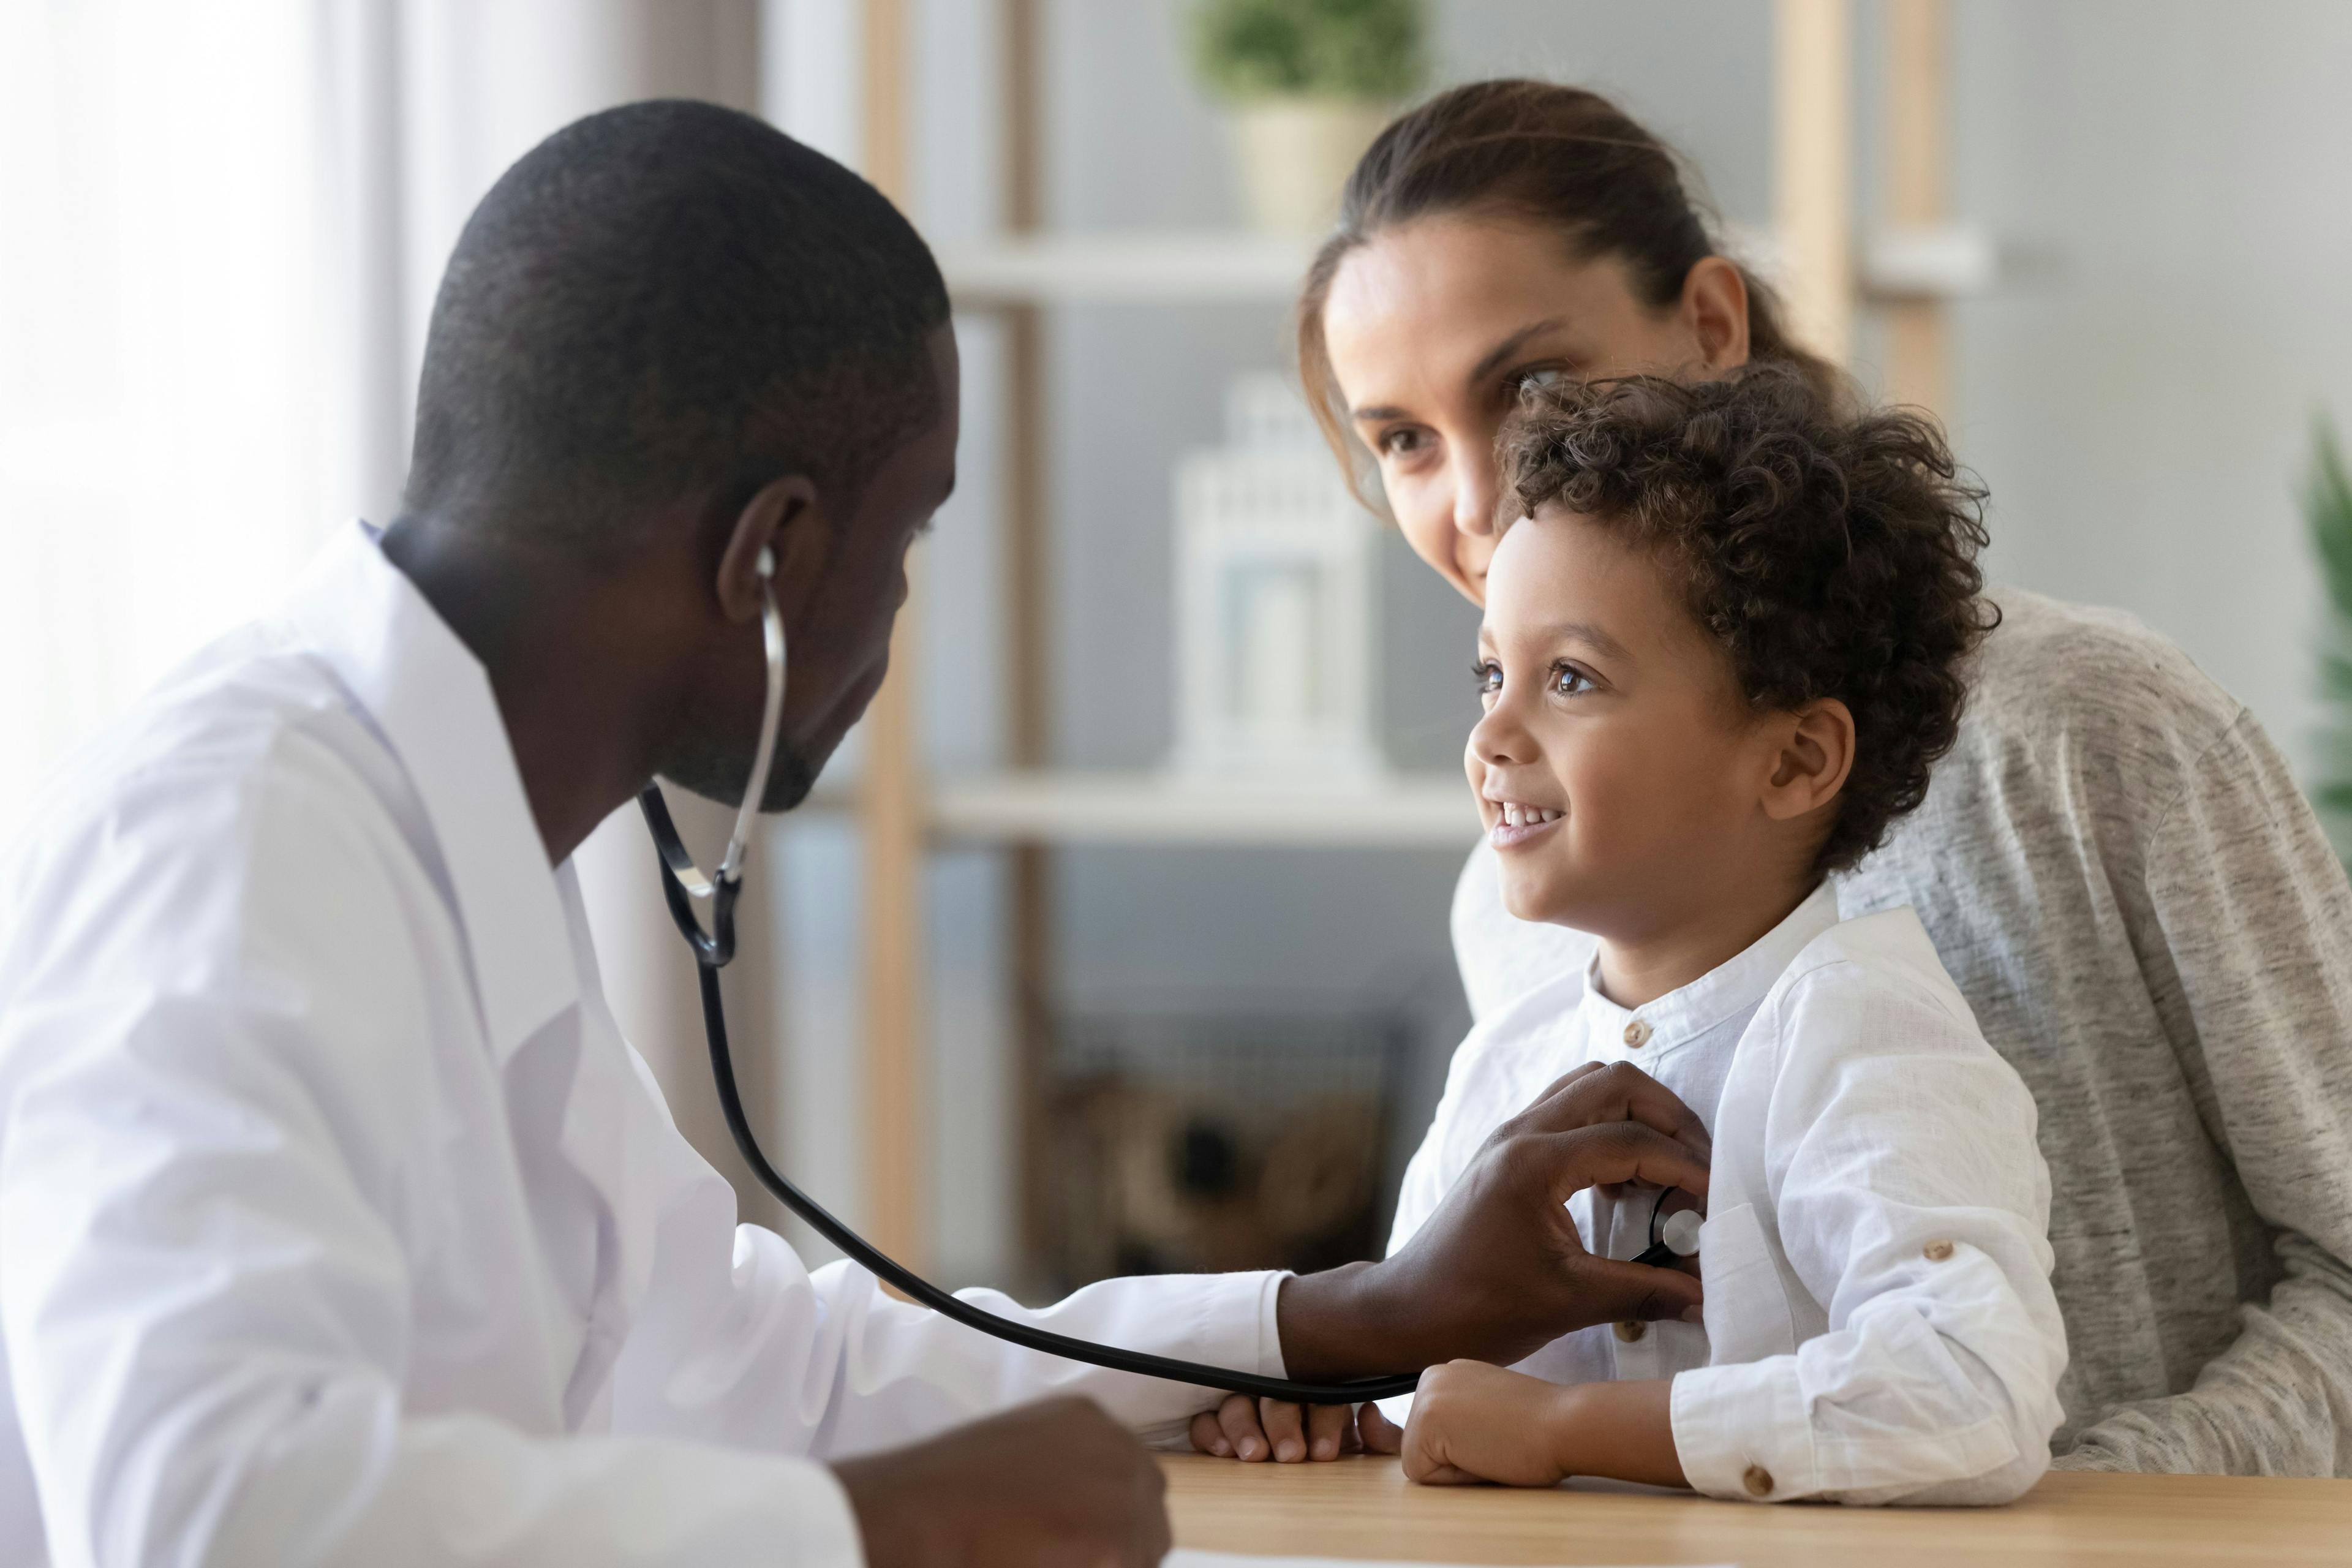 Managed care plans for children should follow guiding principles to be most efficient  